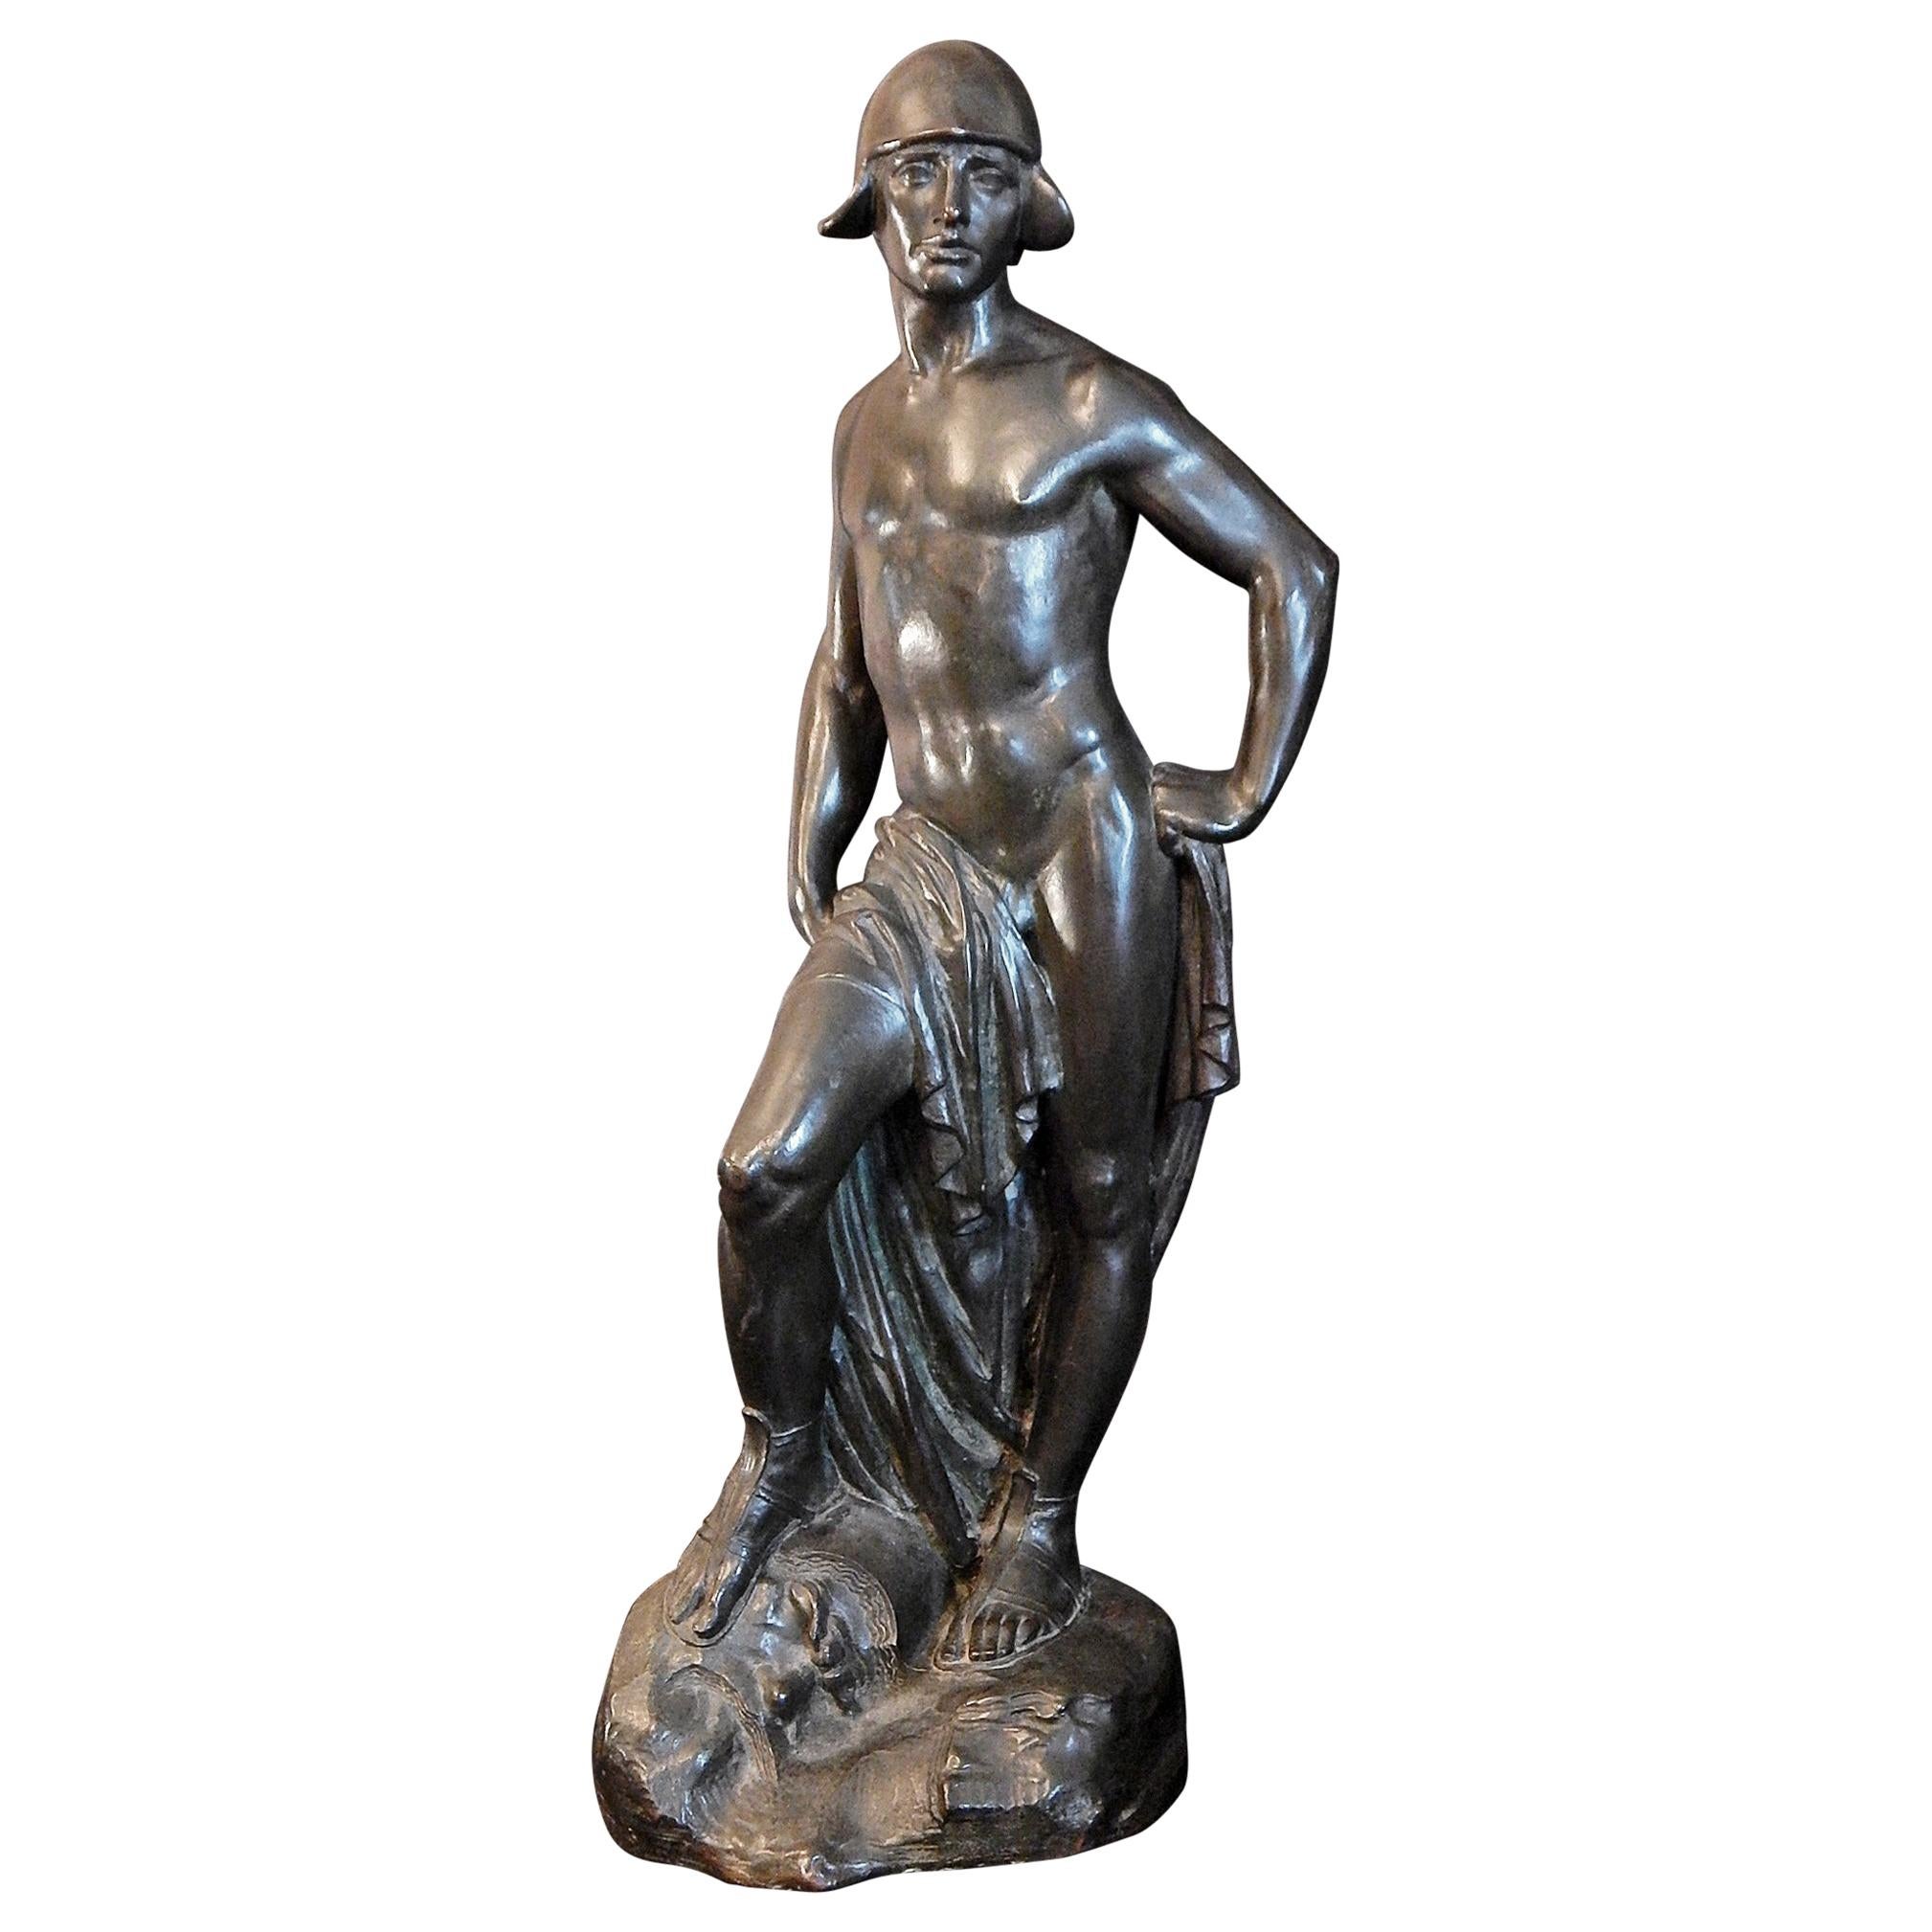 "David," Large, Superb Bronze with Half-Nude Male Figure by Atkins